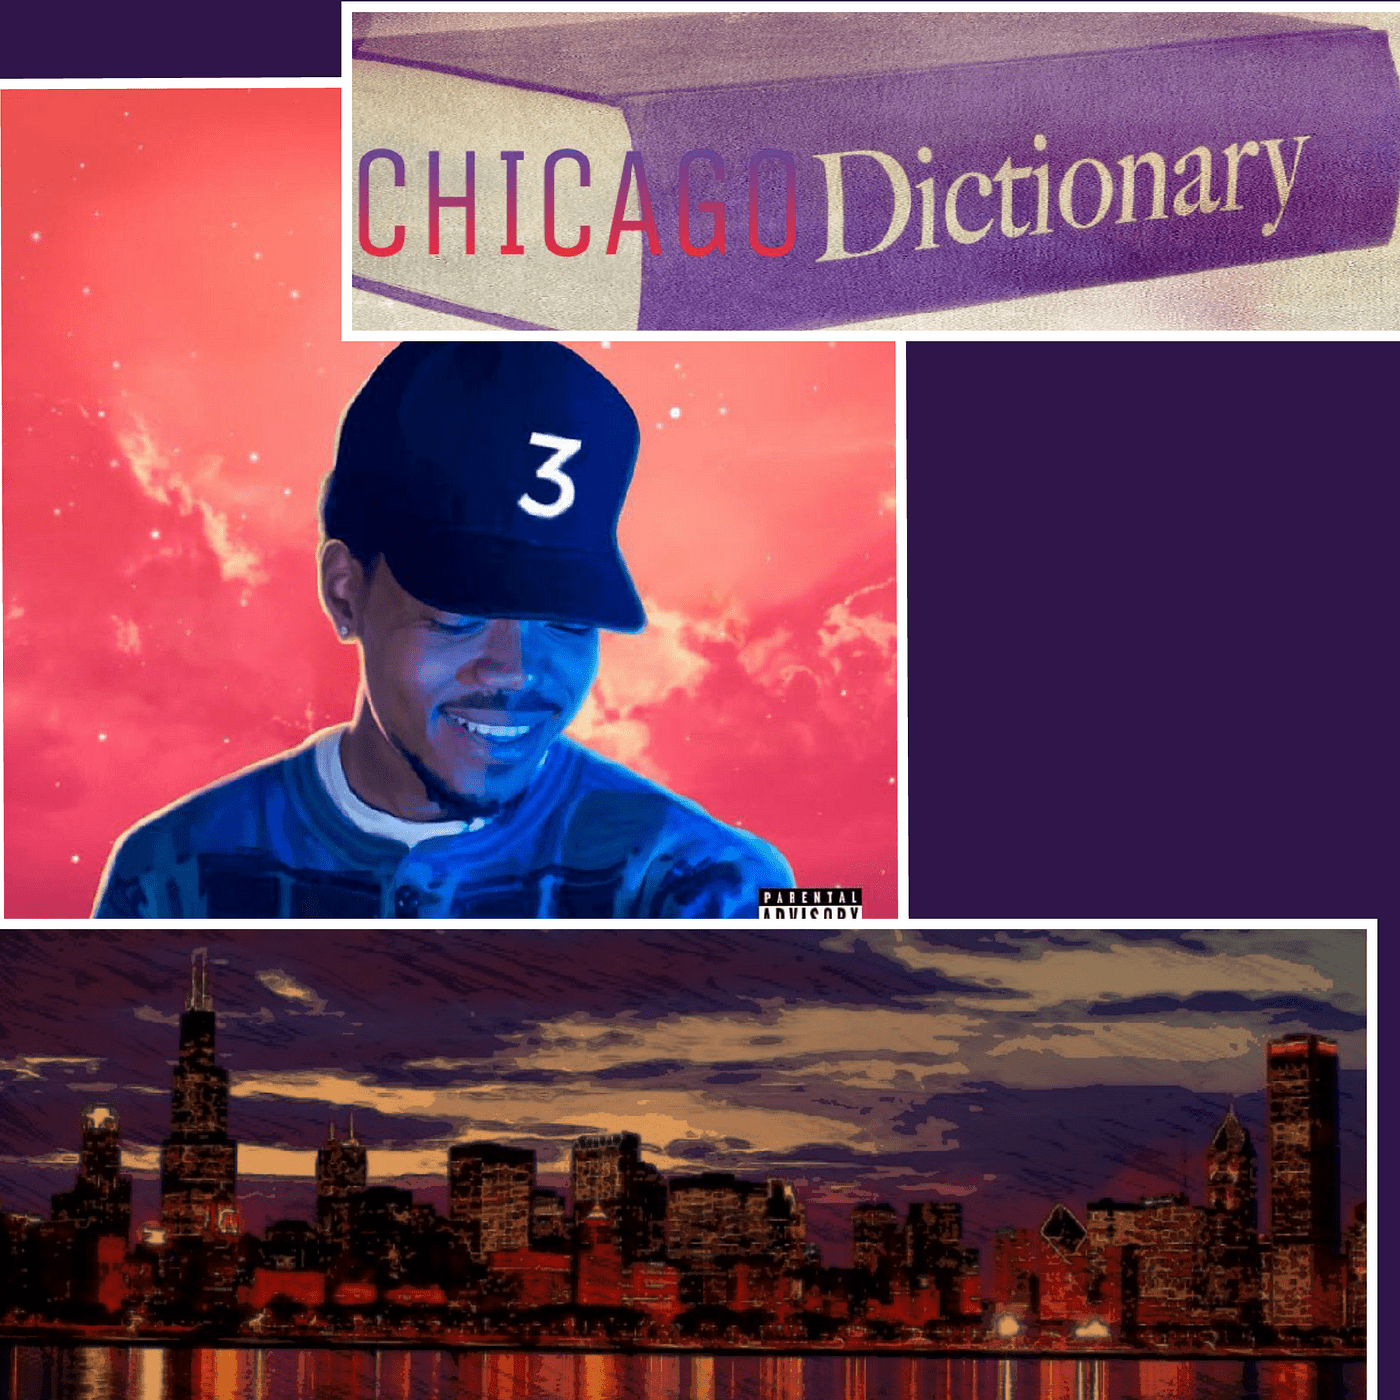 The Chicago Dictionary For Chance The Rapper's Coloring Book. by Ryan “NayR” Chandler